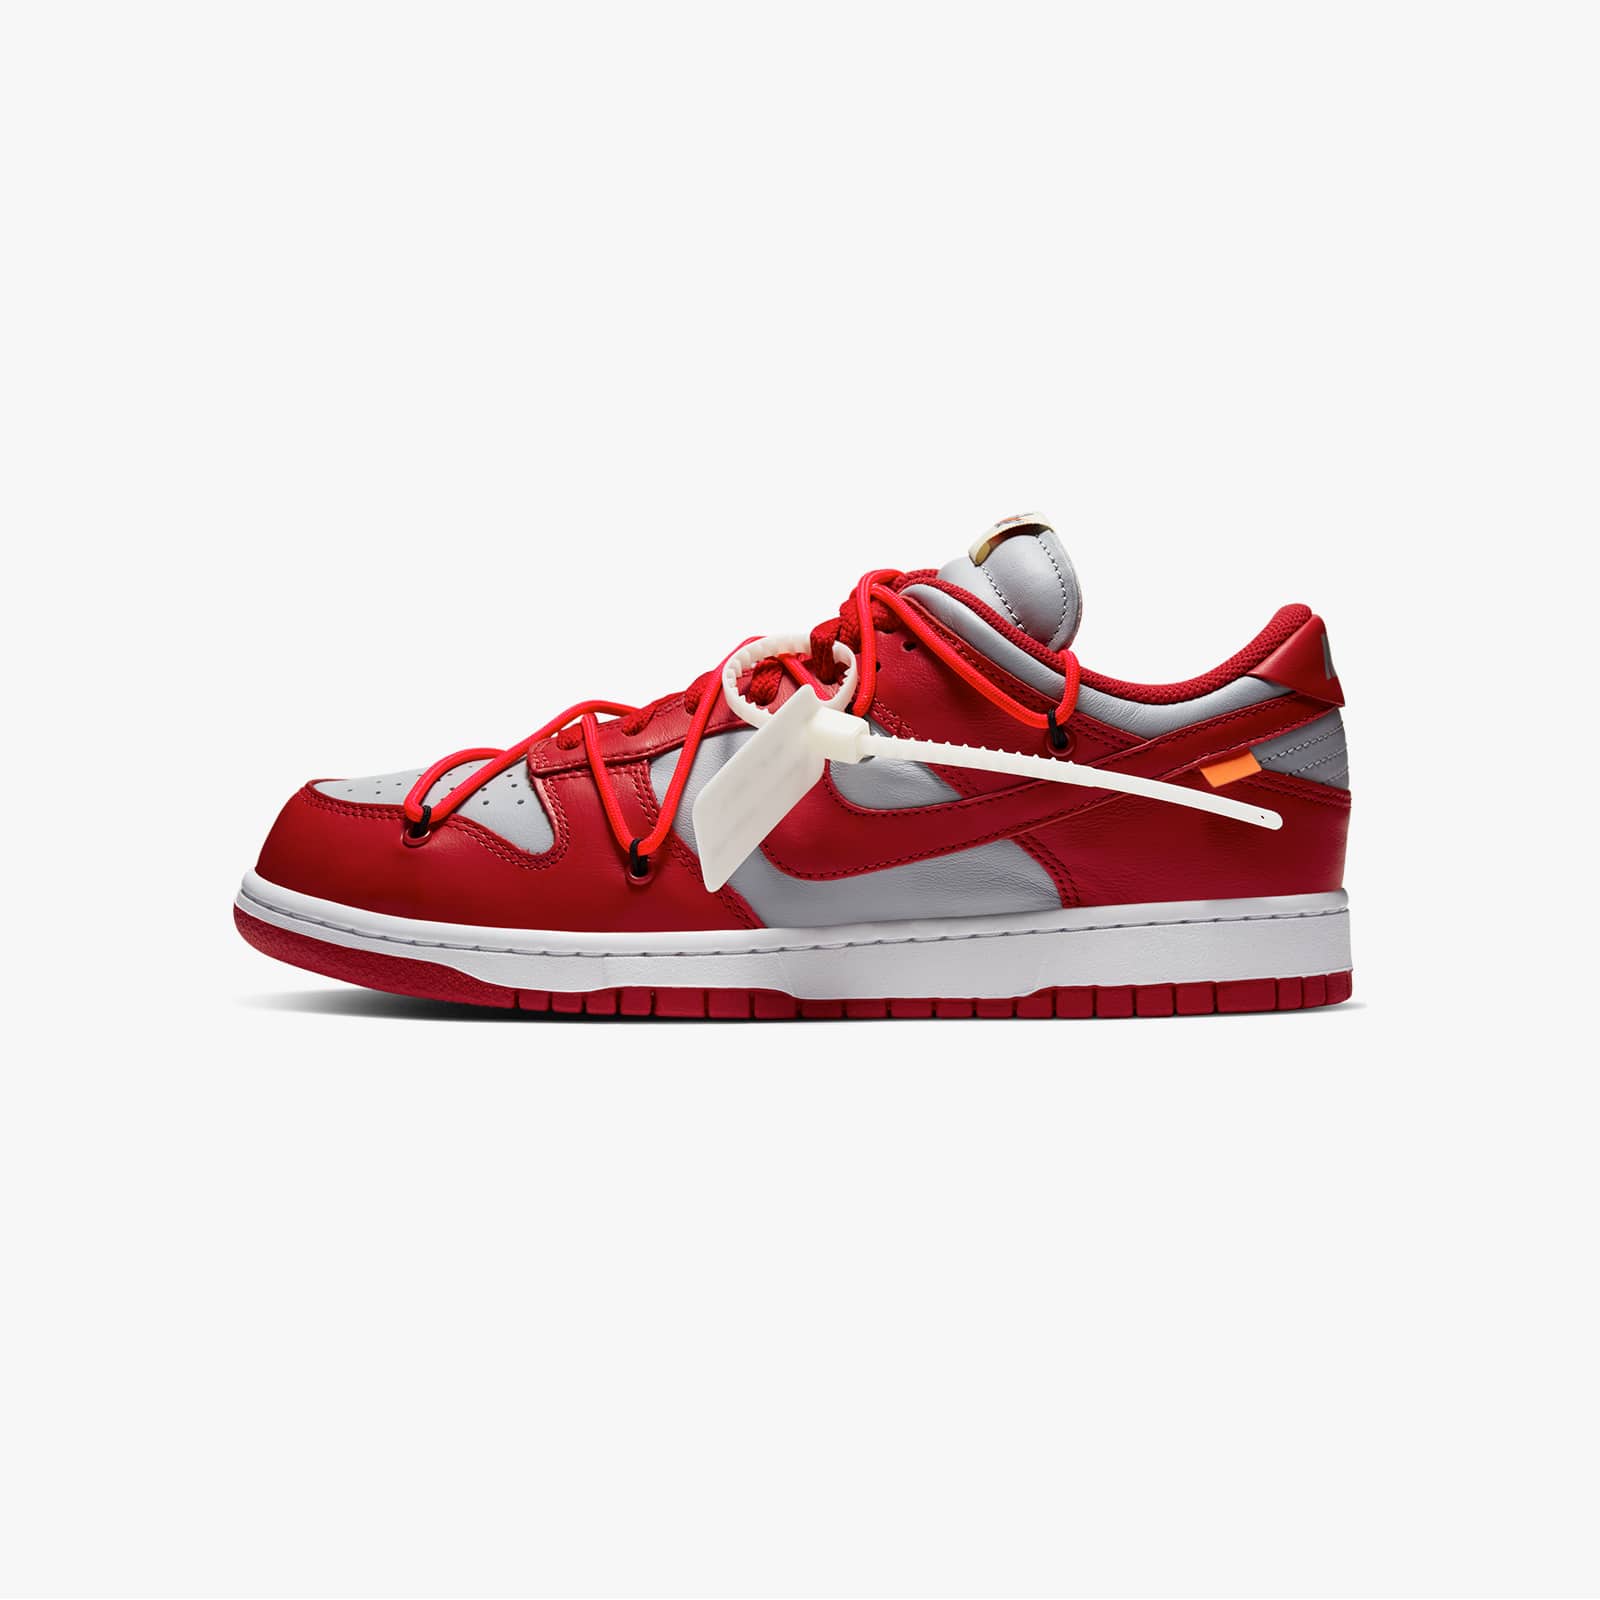 How to Cop Nike Off-White Dunk Low University Red Drops & Raffles